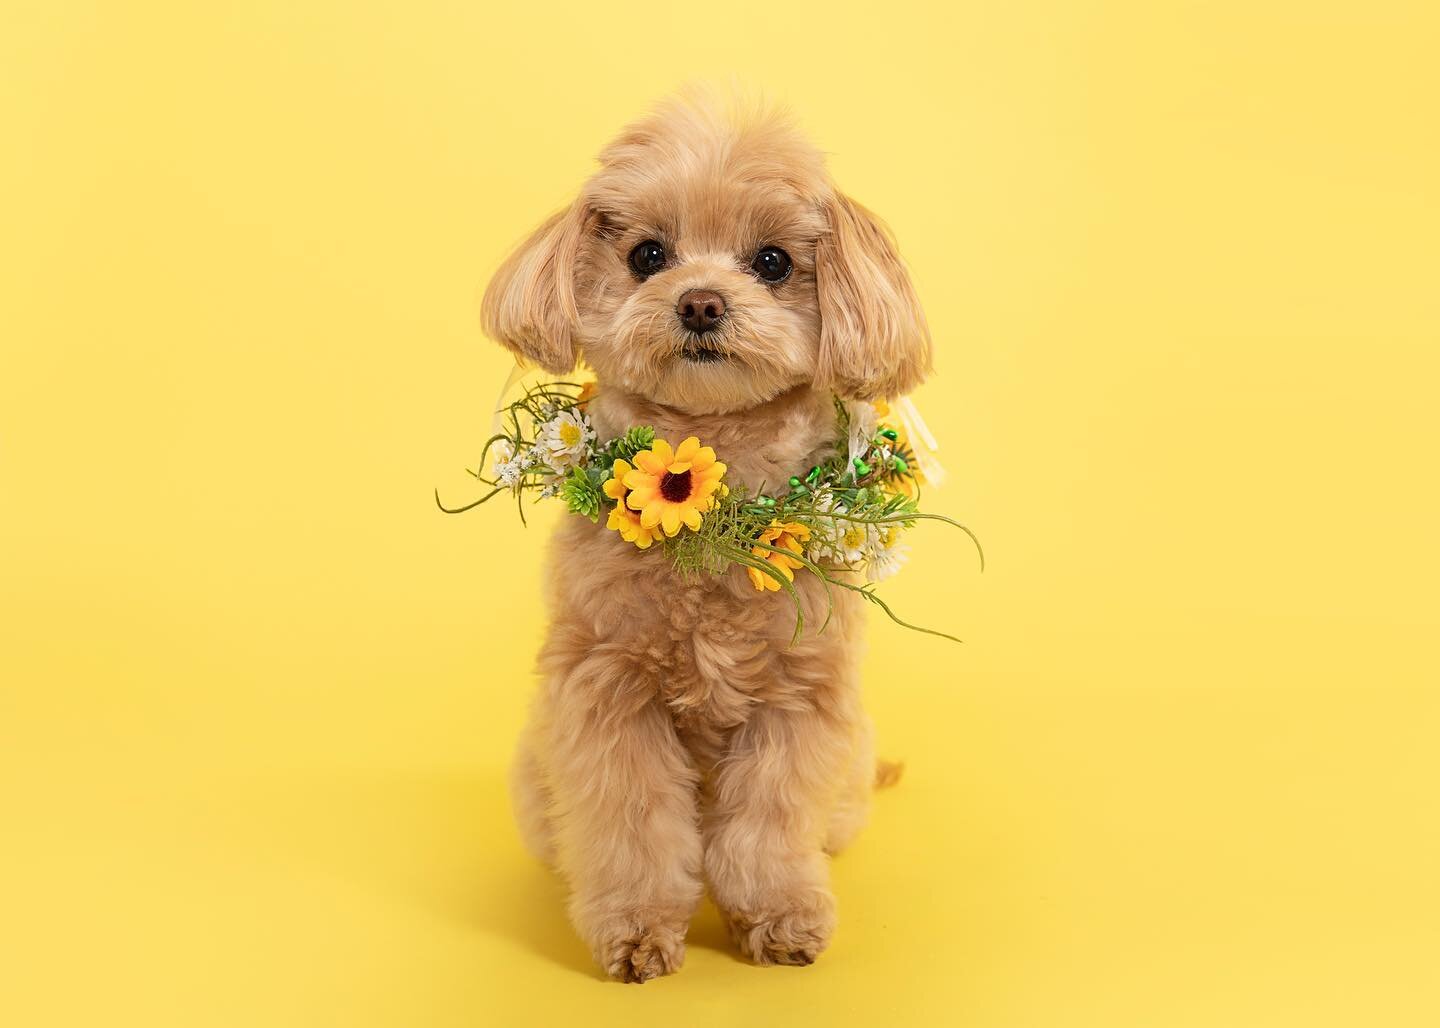 Attention all SLU dog owners! Get ready for the cutest lunch break ever! Give your furry friend a mid-day break with our lunchtime minis🧡

We have very limited spots during weekdays only. Book now and your dog will love being the start of the show📸